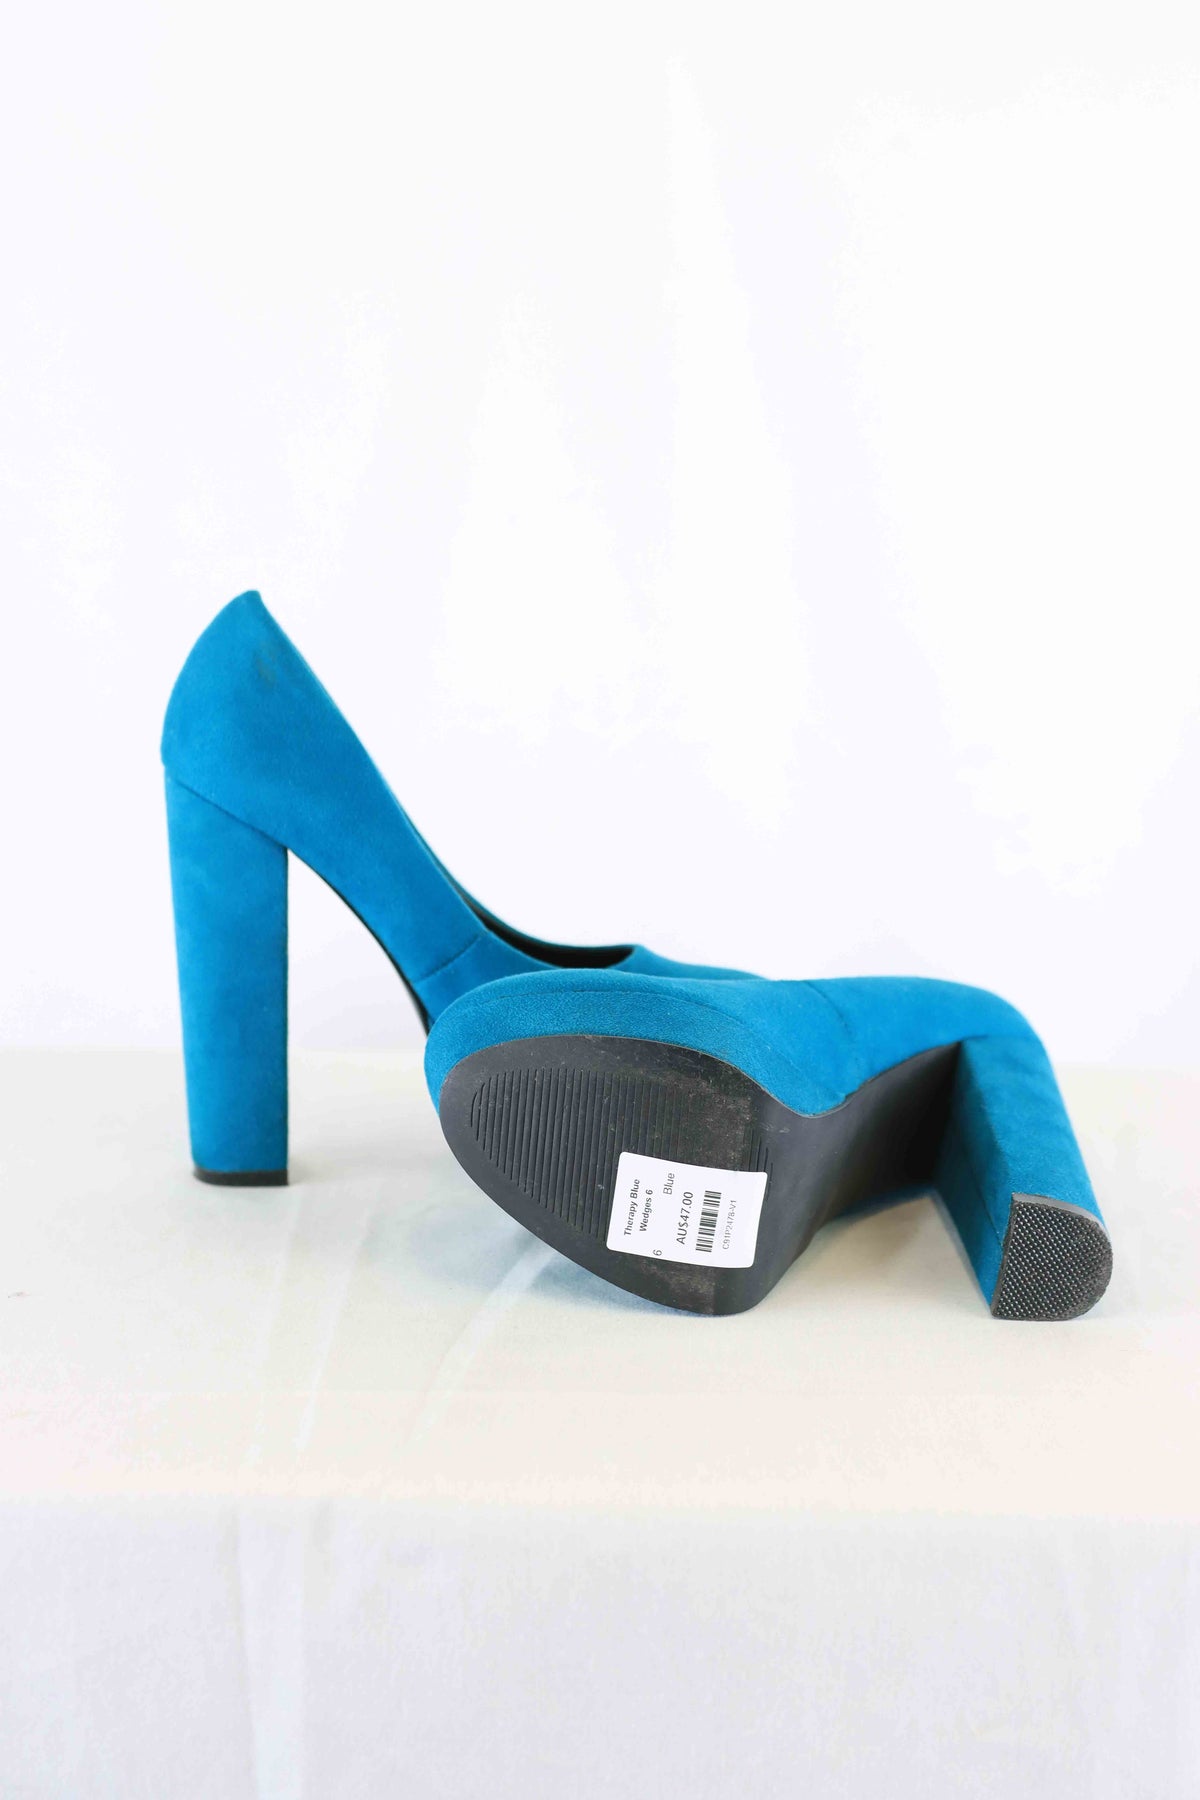 Therapy Blue Heels 6